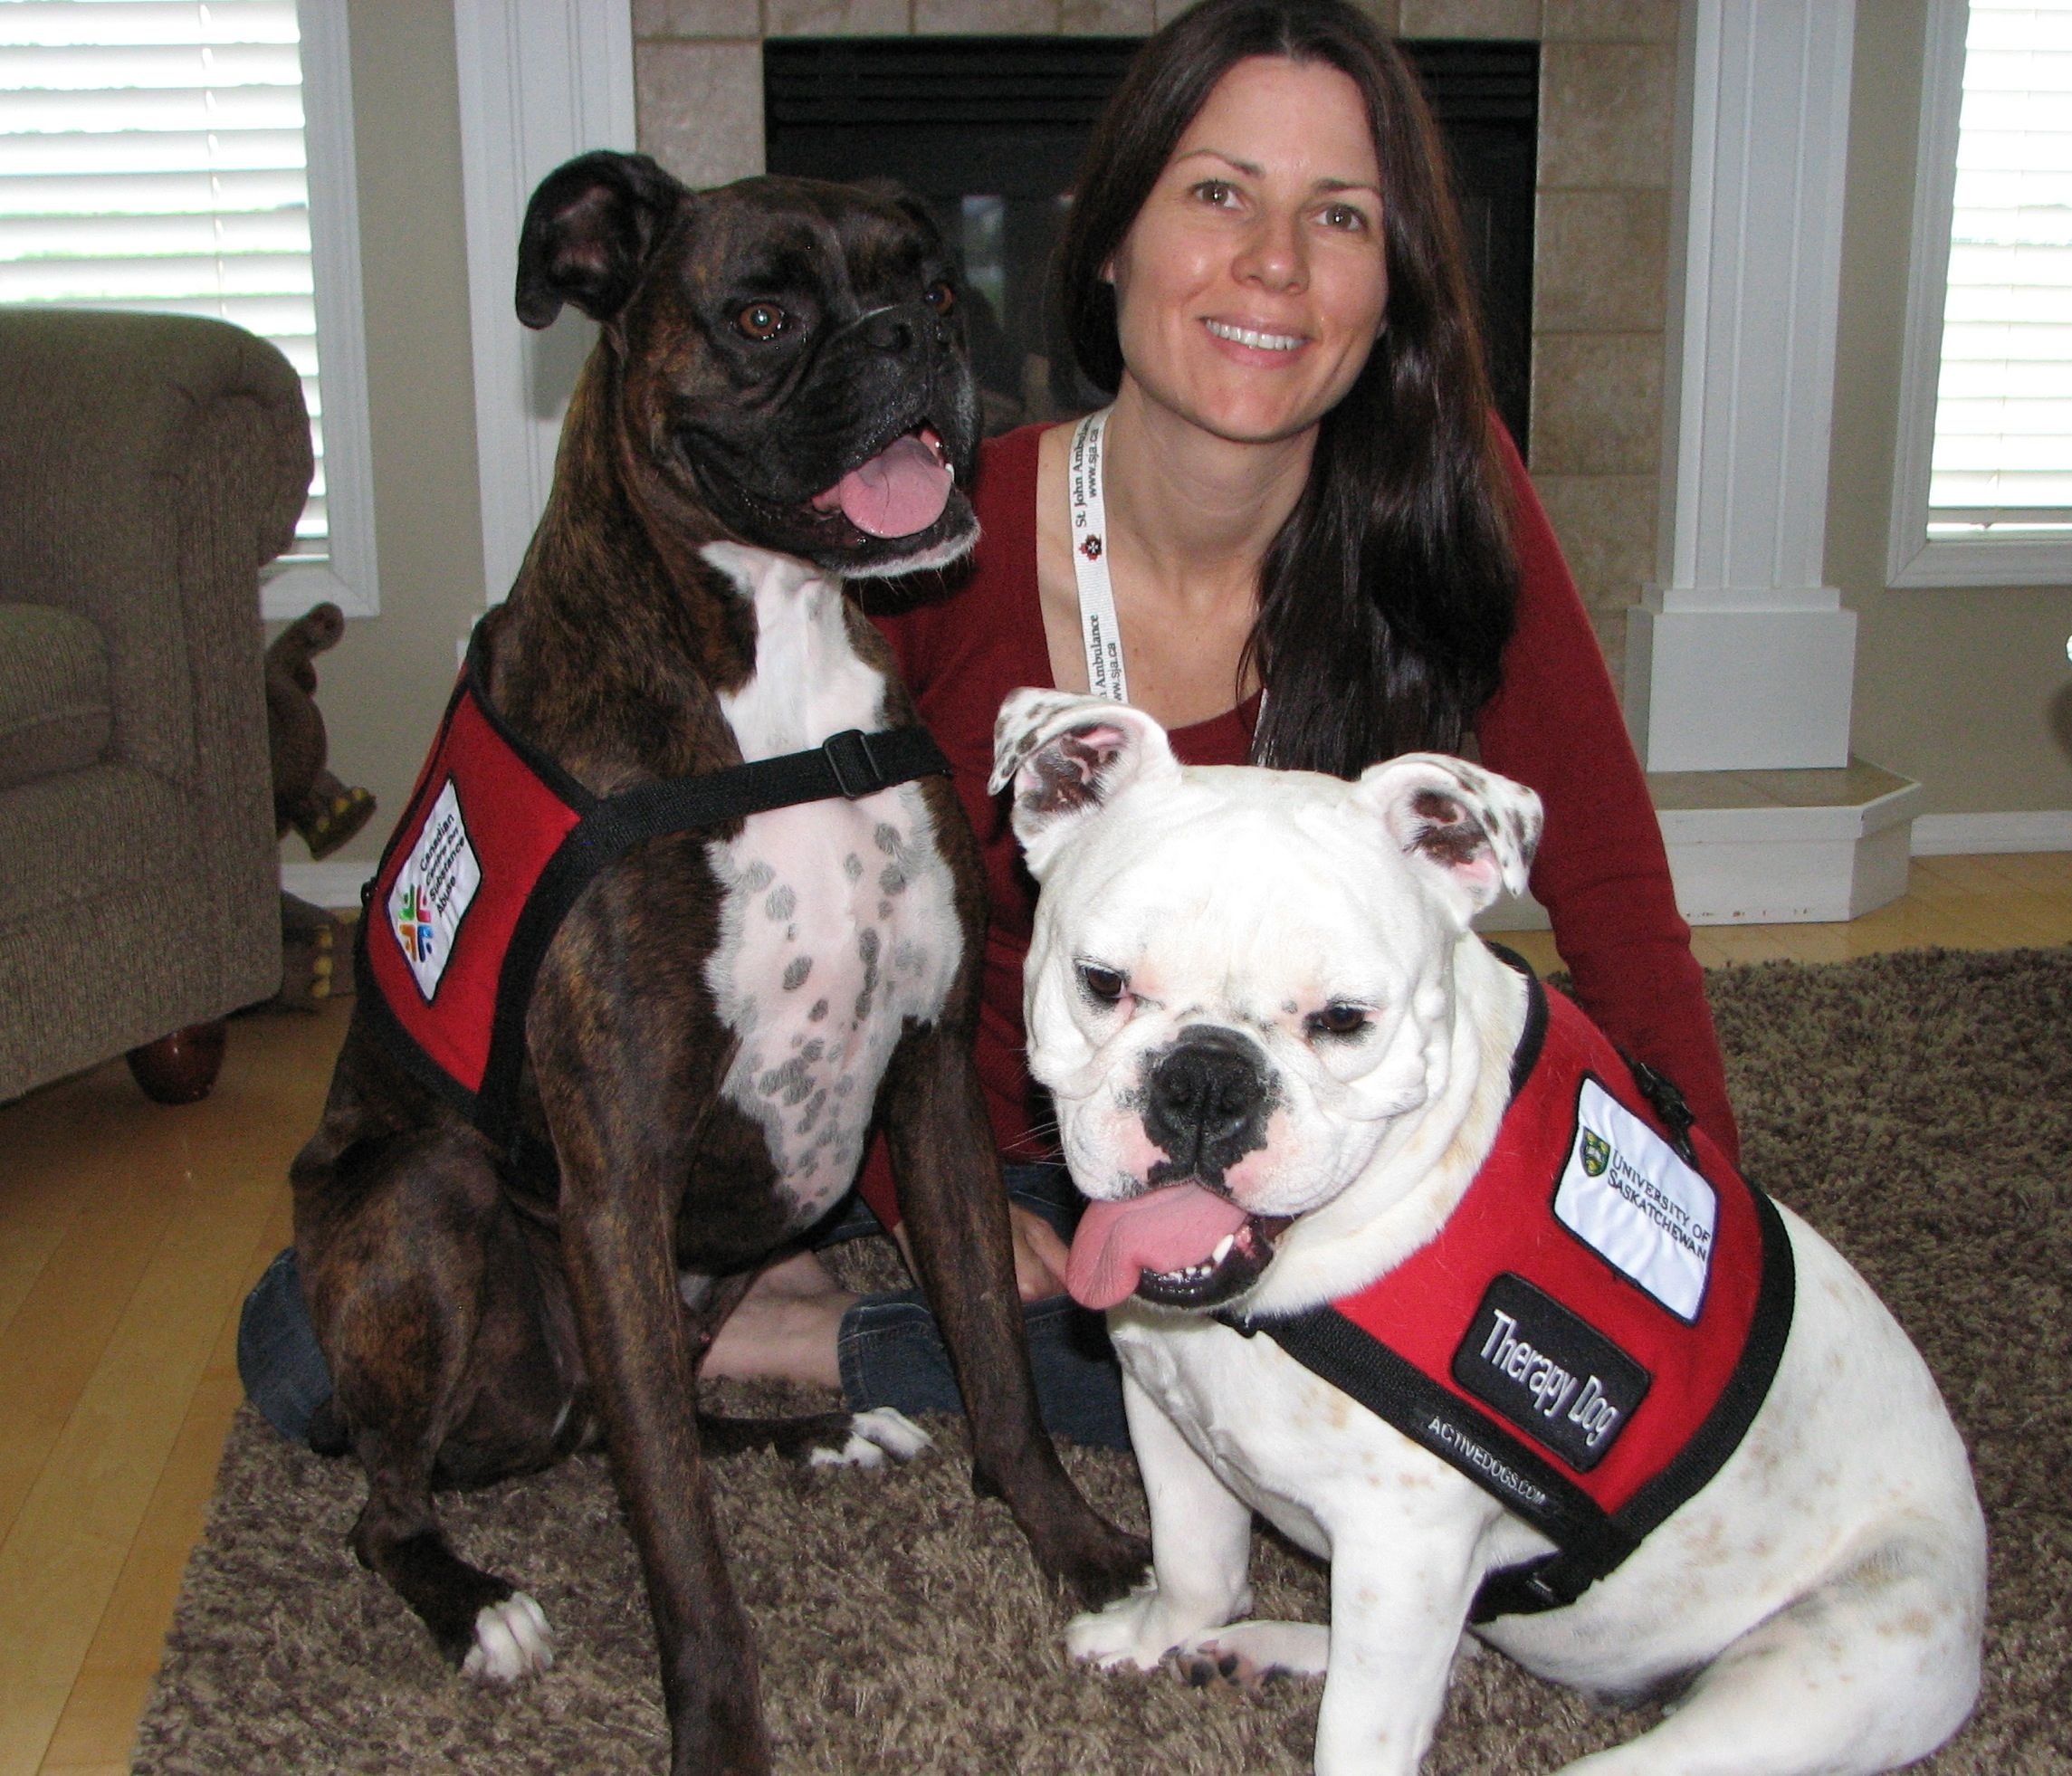 Colleen Dell with Subie (left) and Anna-Belle (right), her two St. John's Ambulance certified therapy dogs. Photo: David Batstone.